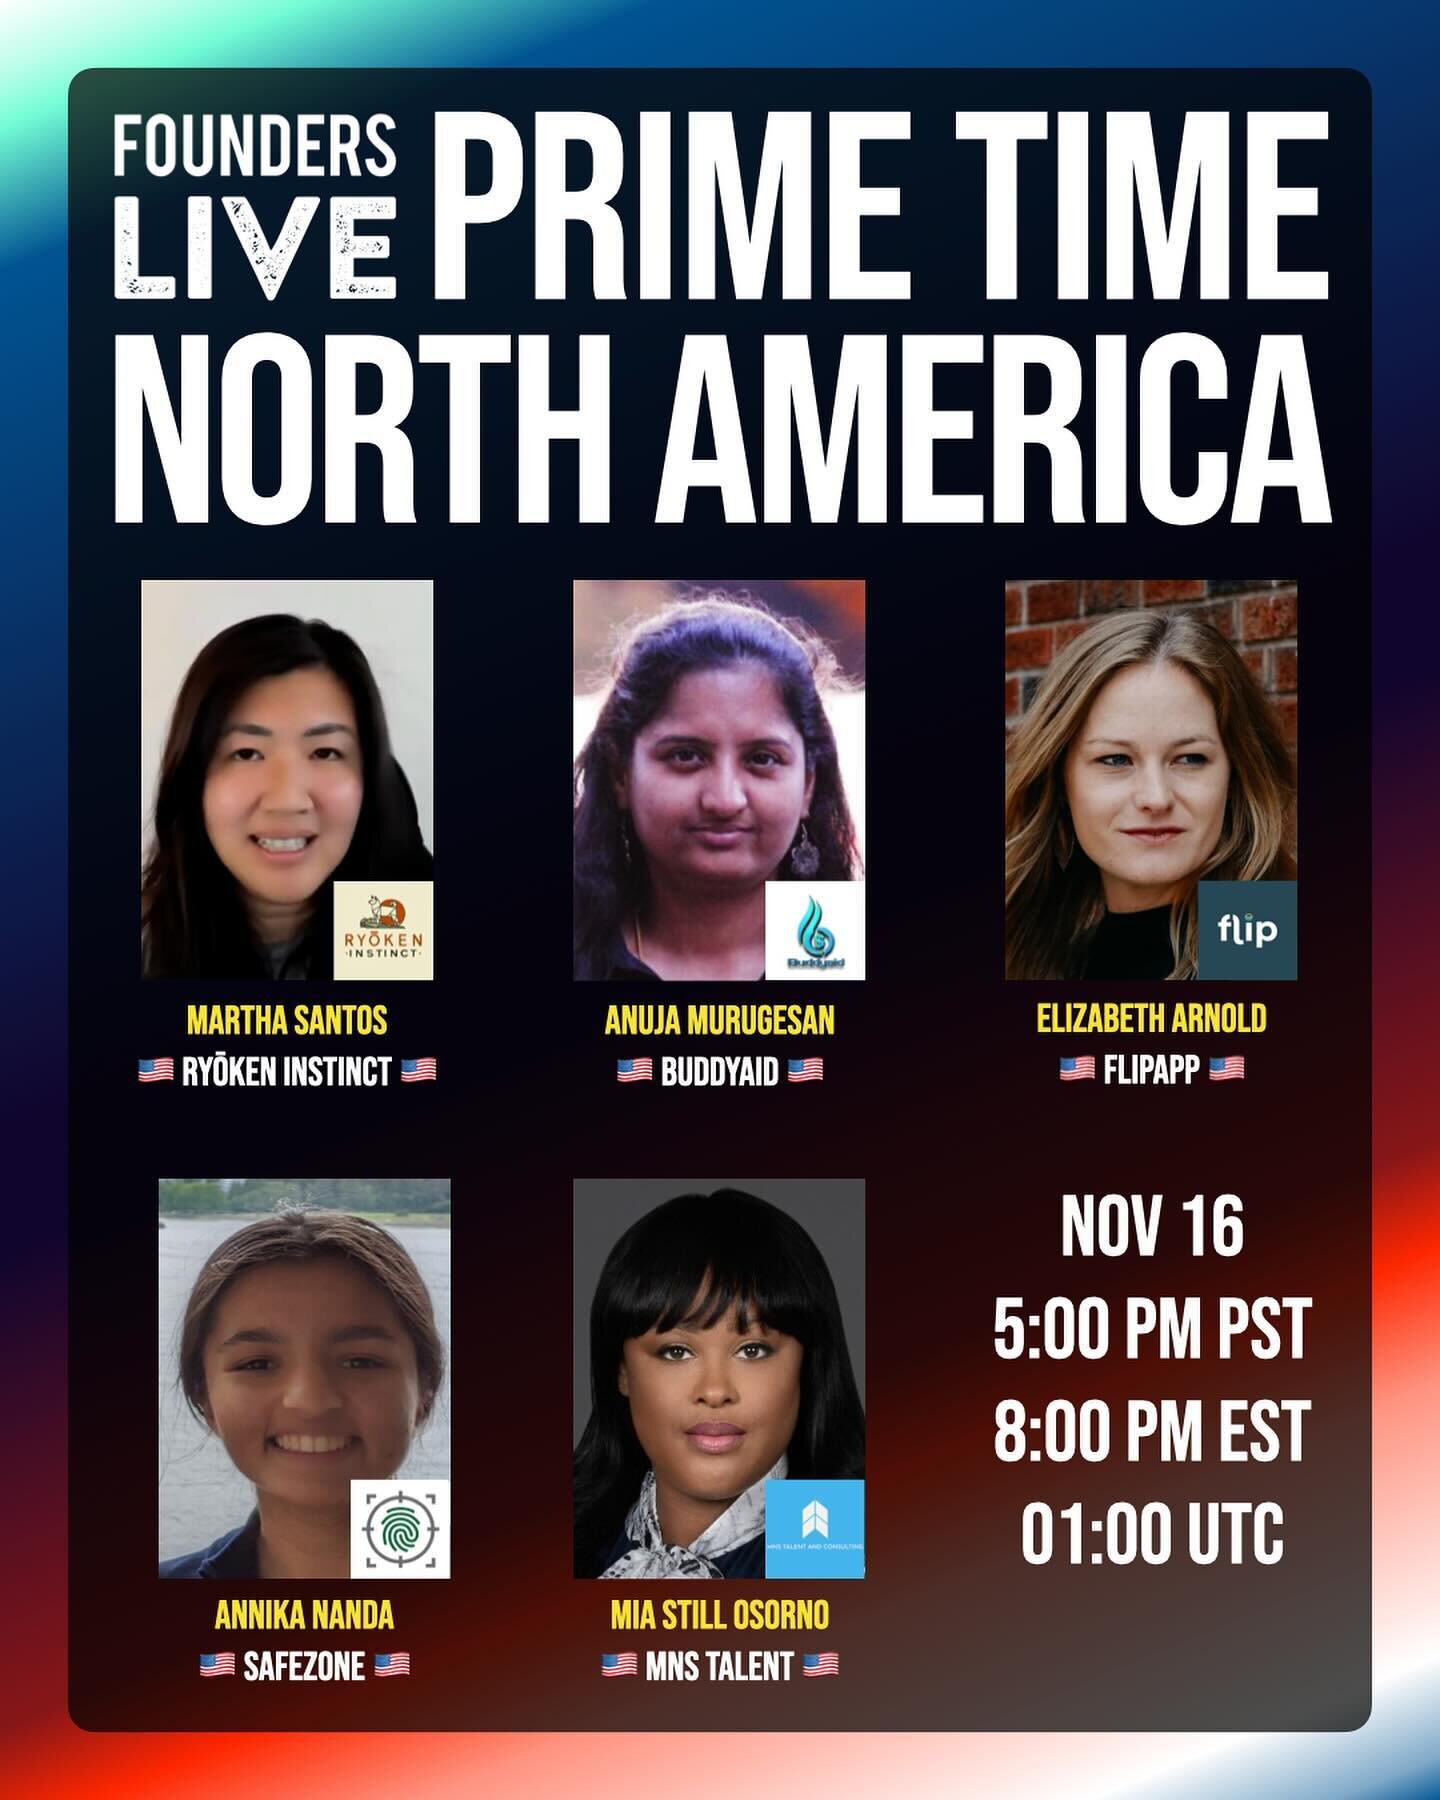 Join us for the North America regional finals on Thursday - Day 4 of Prime Time and Global Entrepreneurship Week!

North America&rsquo;s top 5 founders and their startups:
🇺🇸 Martha Santos - @ryokeninstinct - Seattle, WA
🇺🇸 Anuja Murugesan - Budd